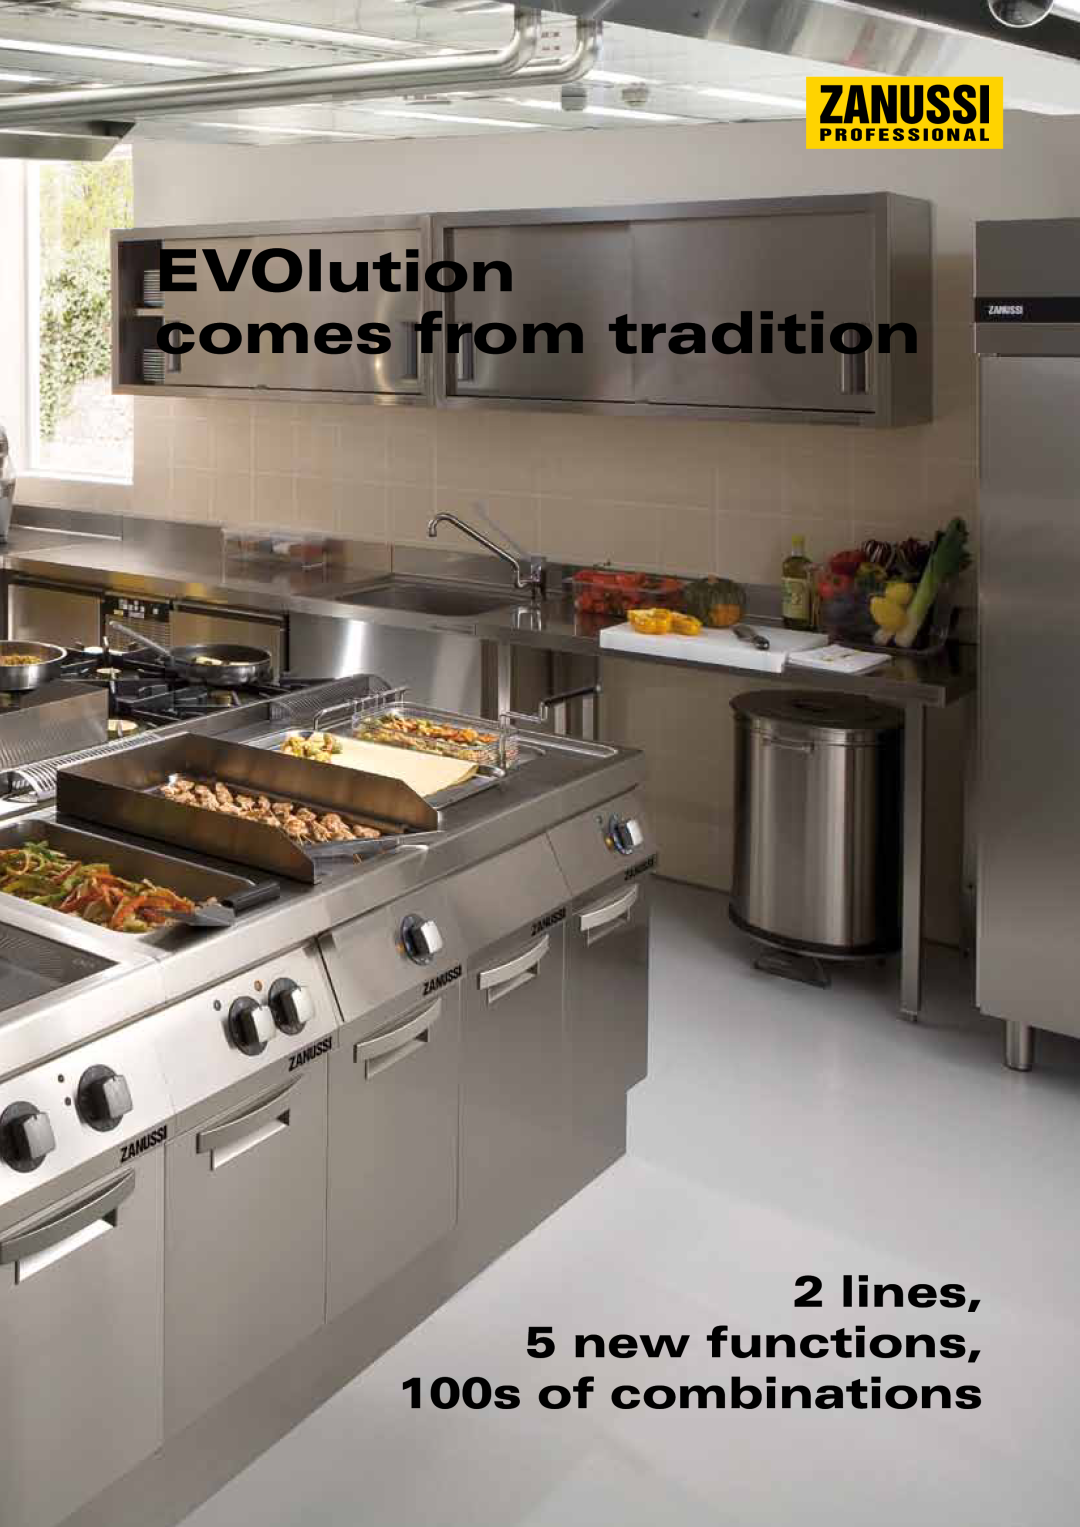 Zanussi EVO700 manual EVOlution comes from tradition, lines 5 new functions 100s of combinations 